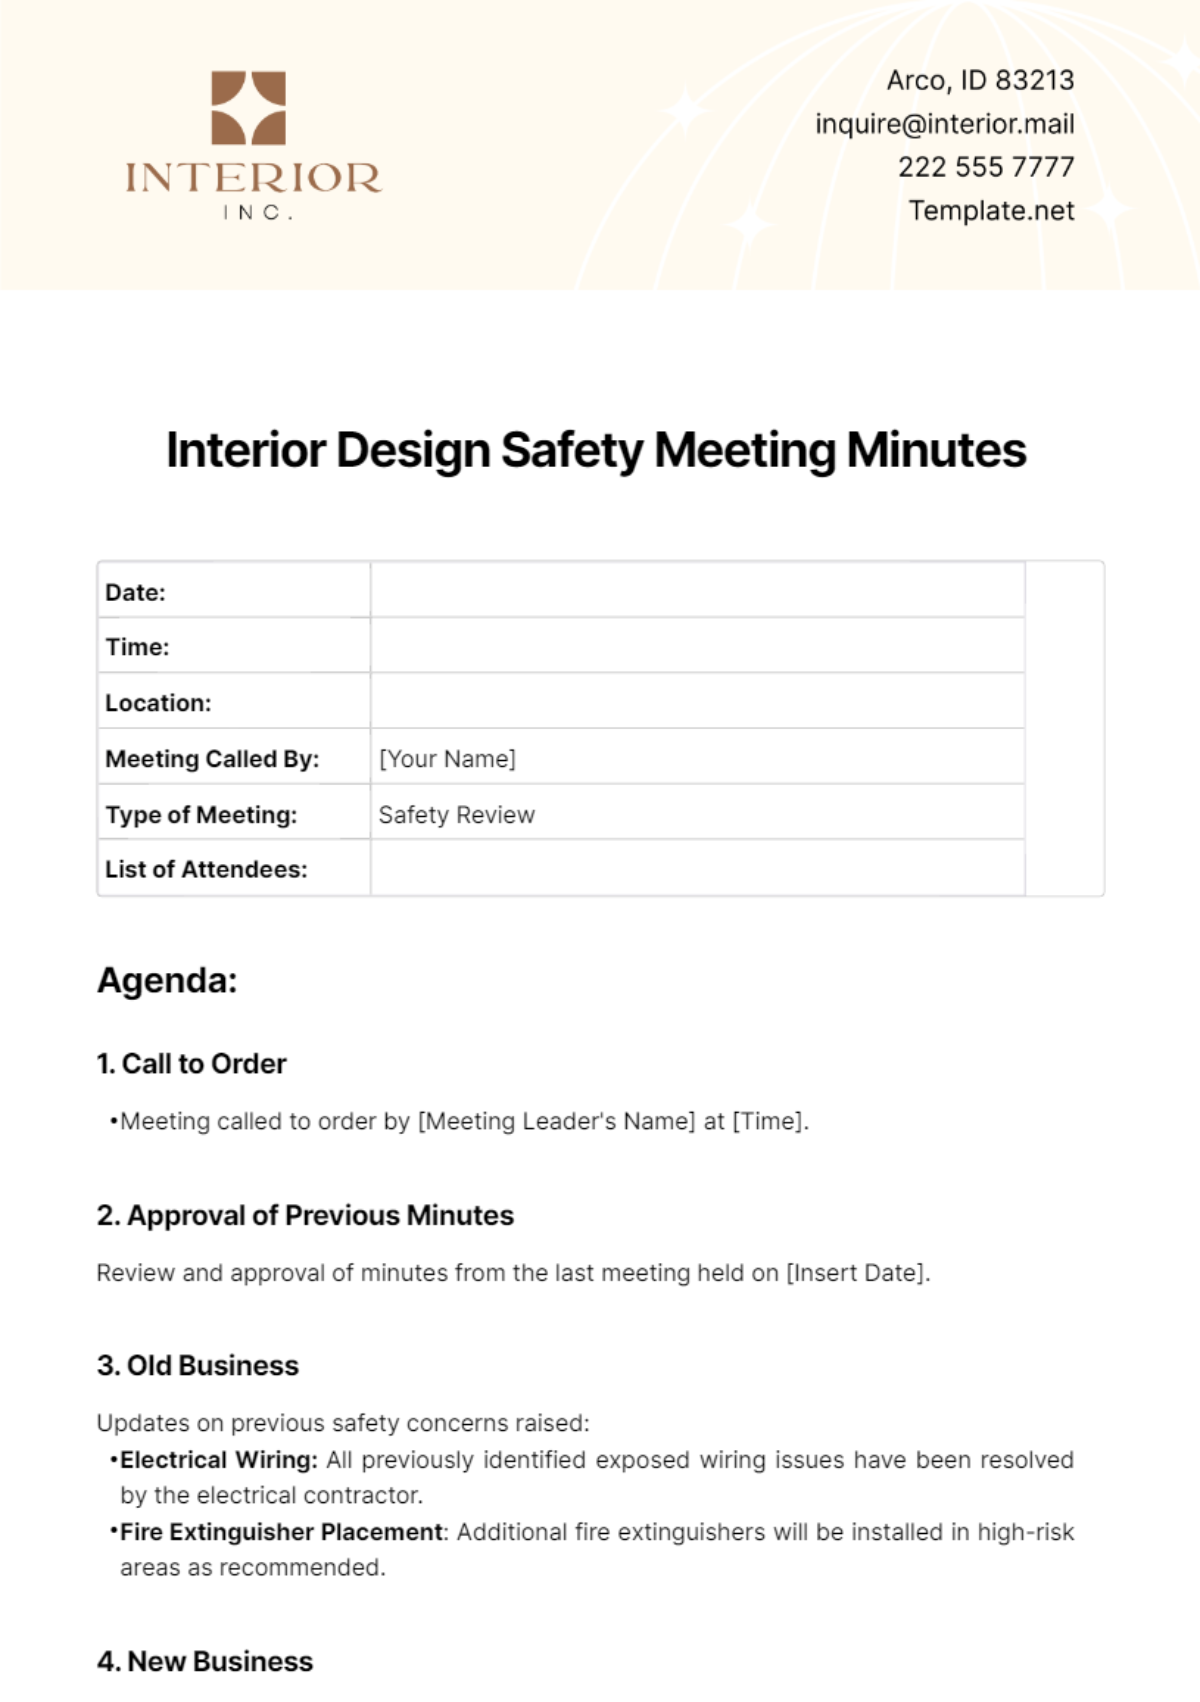 Interior Design Safety Meeting Minutes Template